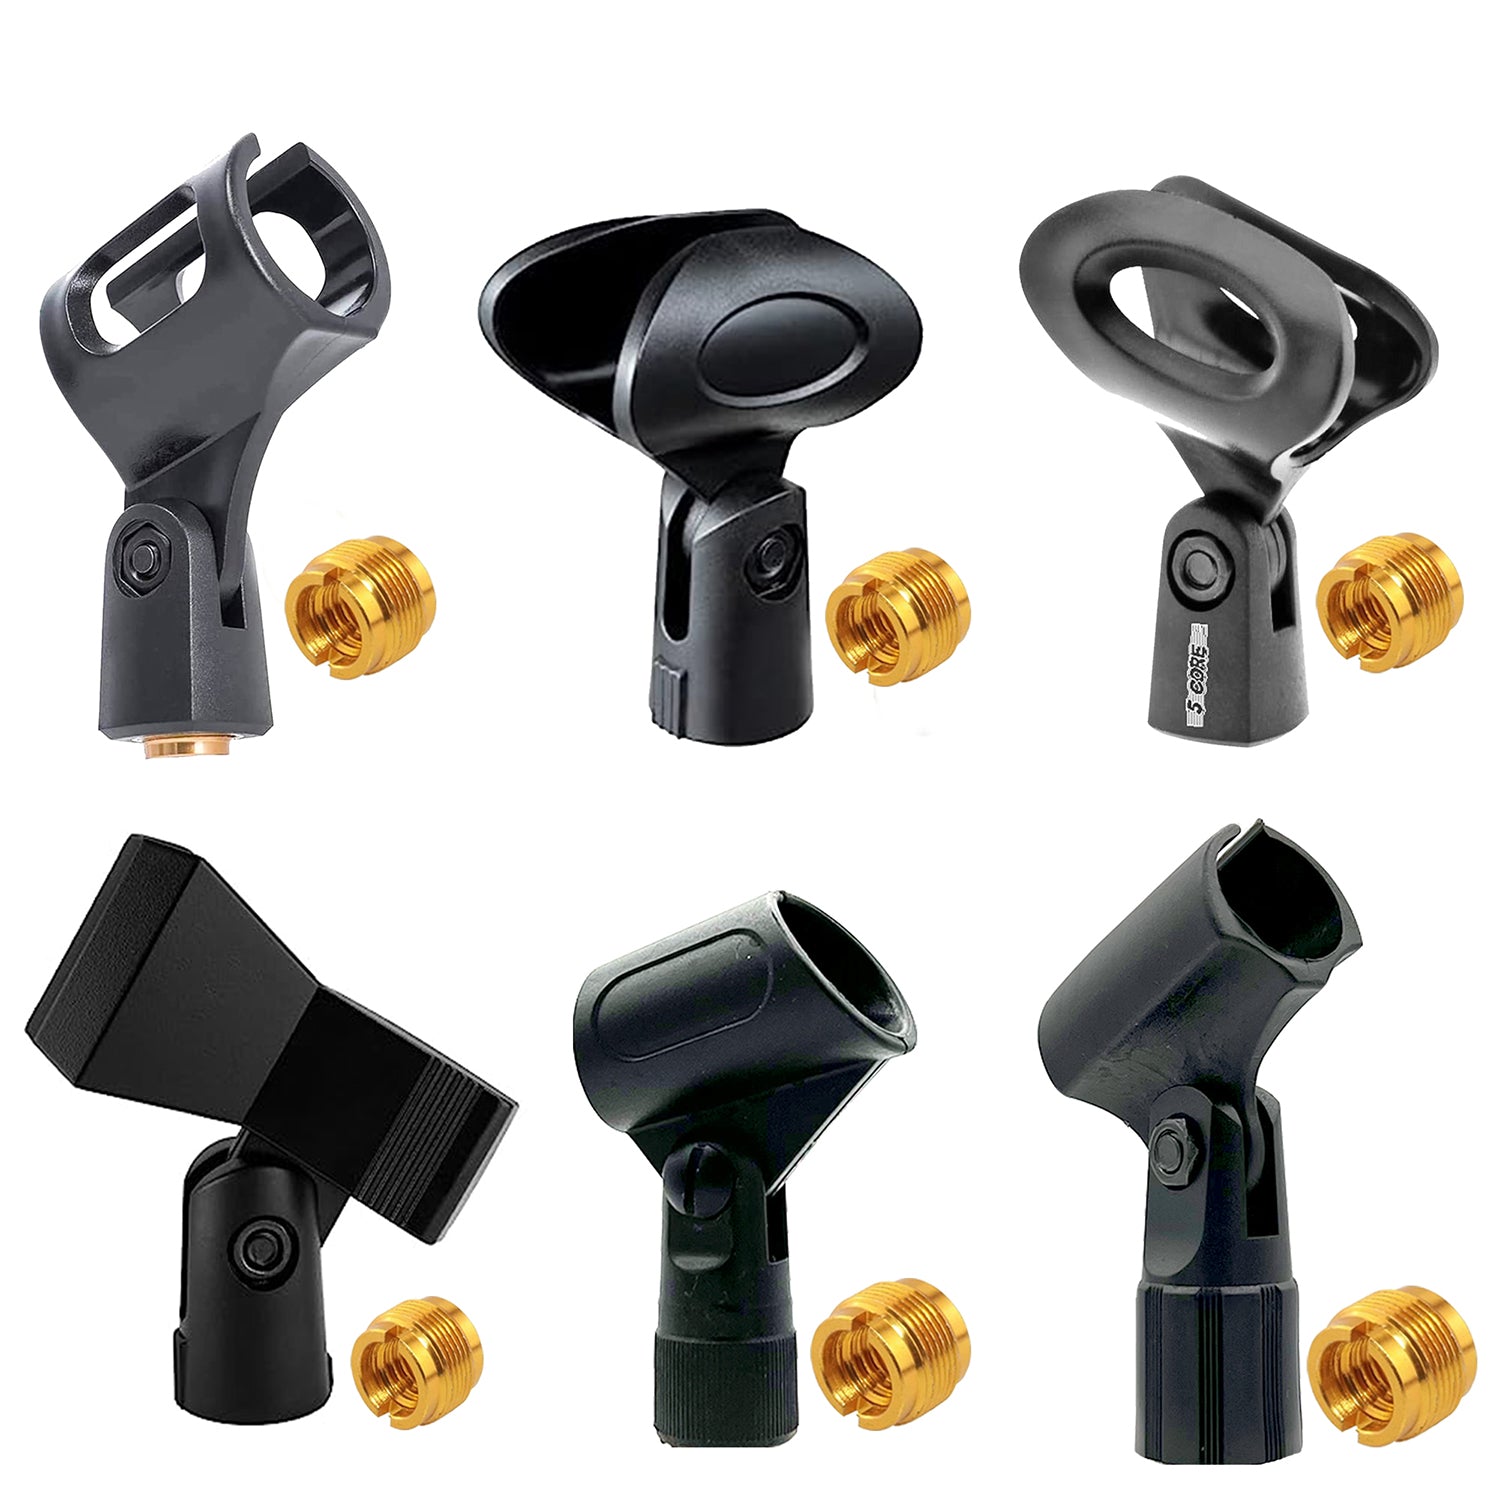 5Core Universal Microphone Clip Holder 6Pack Mic Mount w Gold Plated 5/8" - 3/8" Screw Adapter